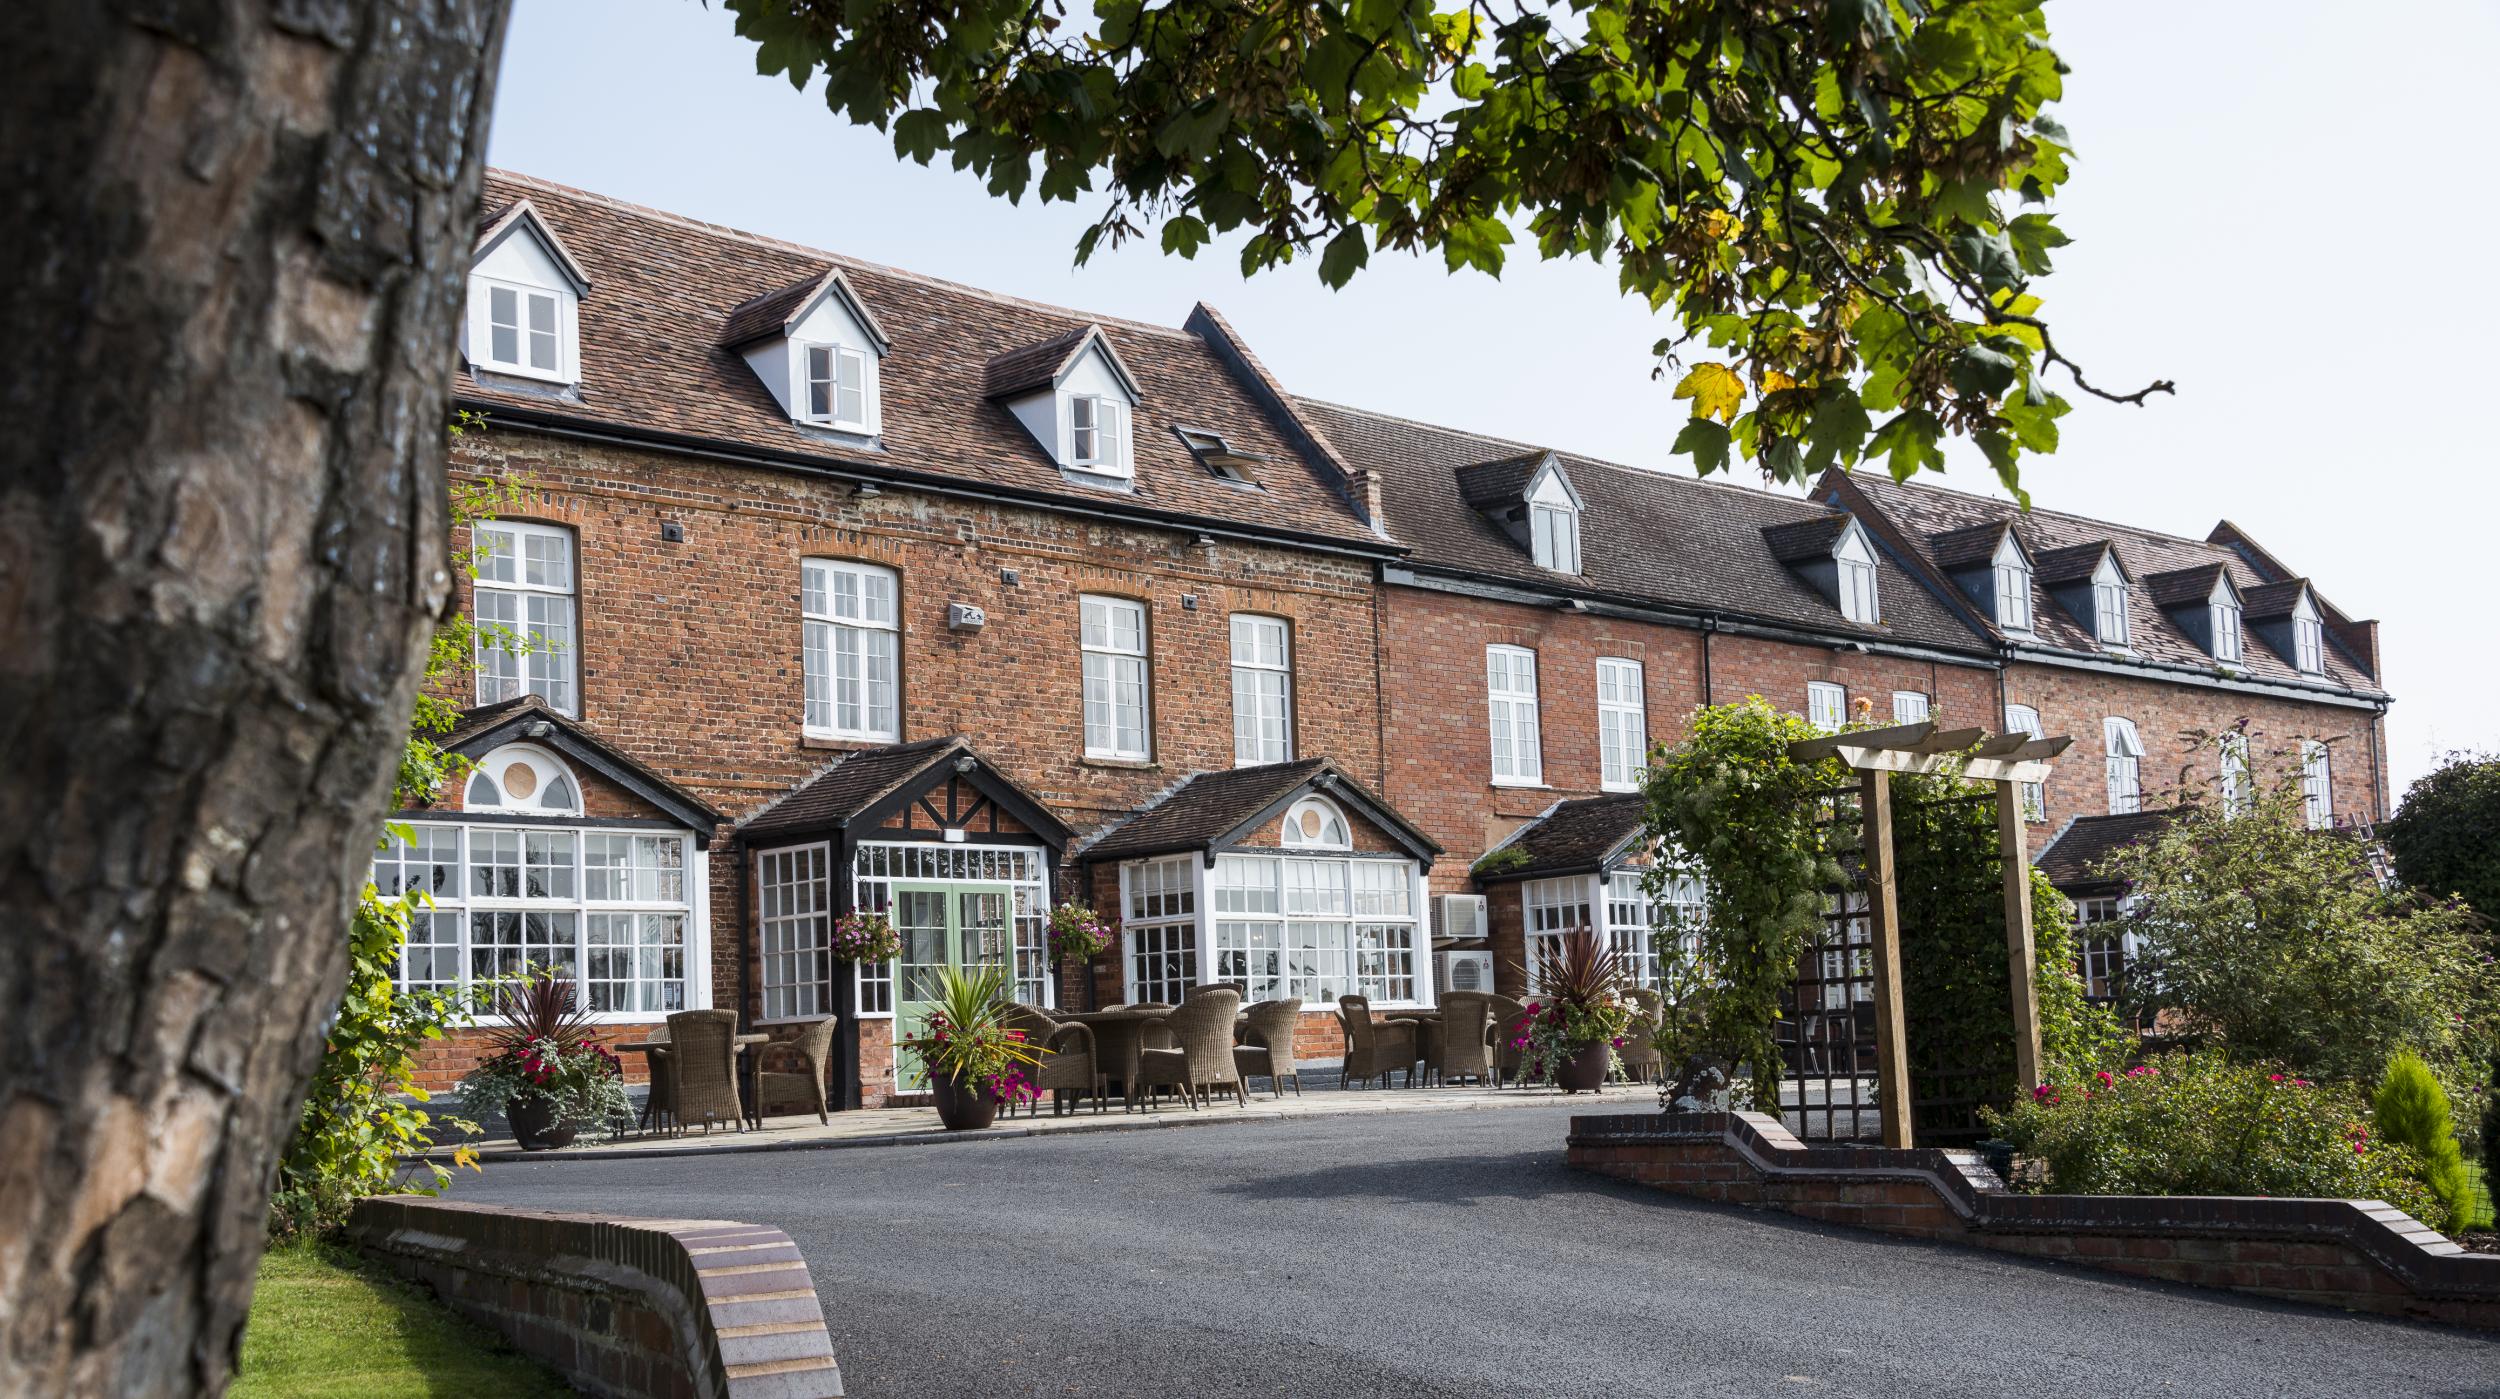 The Bank House Hotel, where doubles start from £95